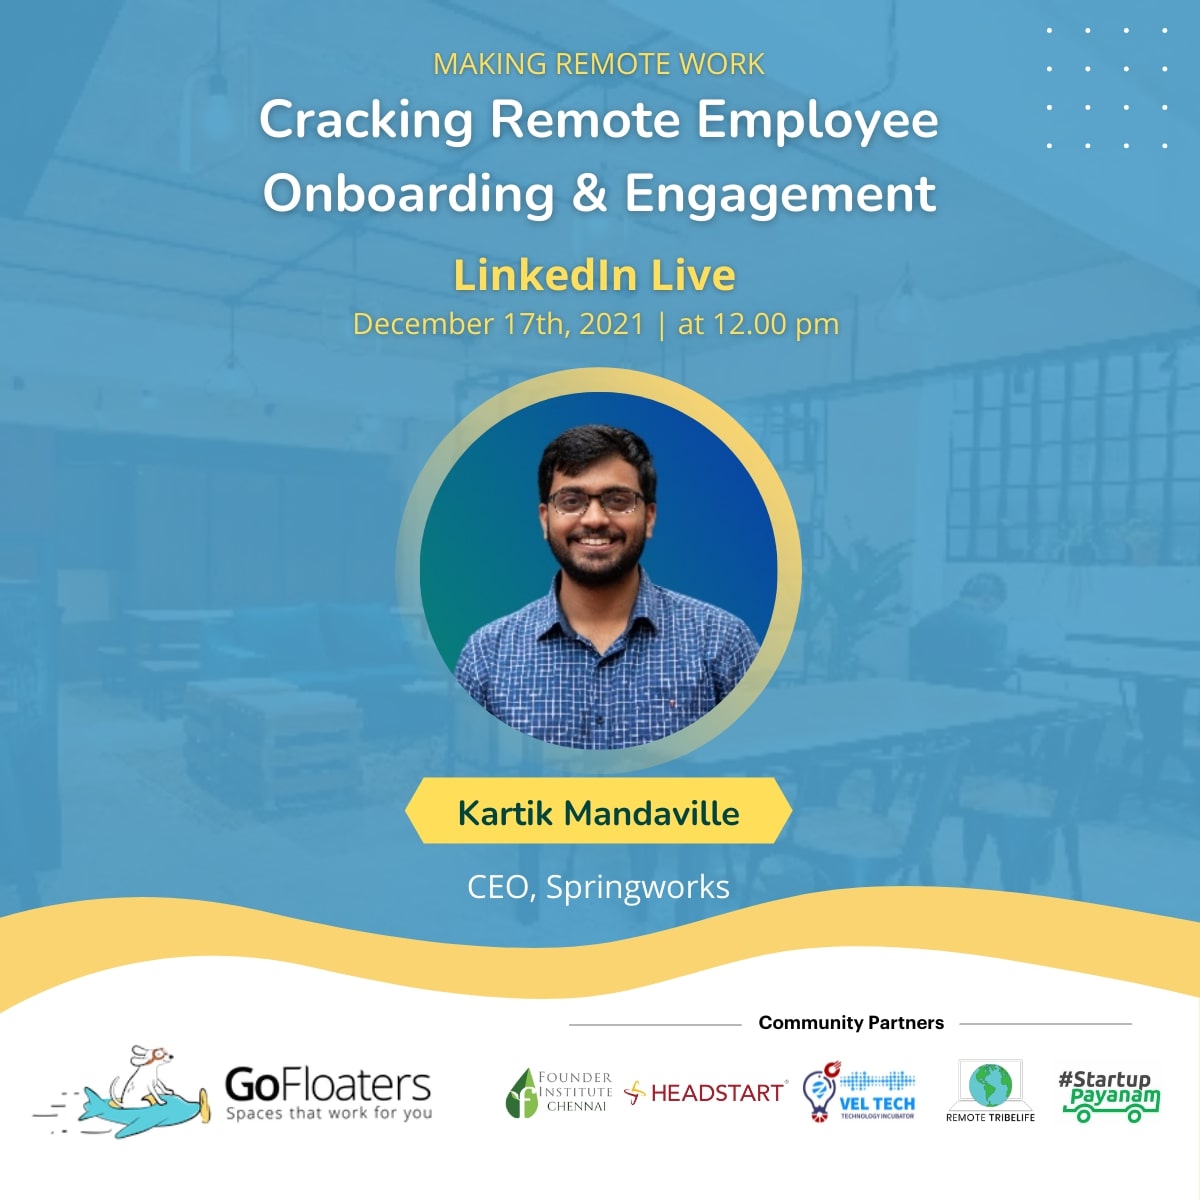 Cracking Remote Employee Onboarding & Engagement